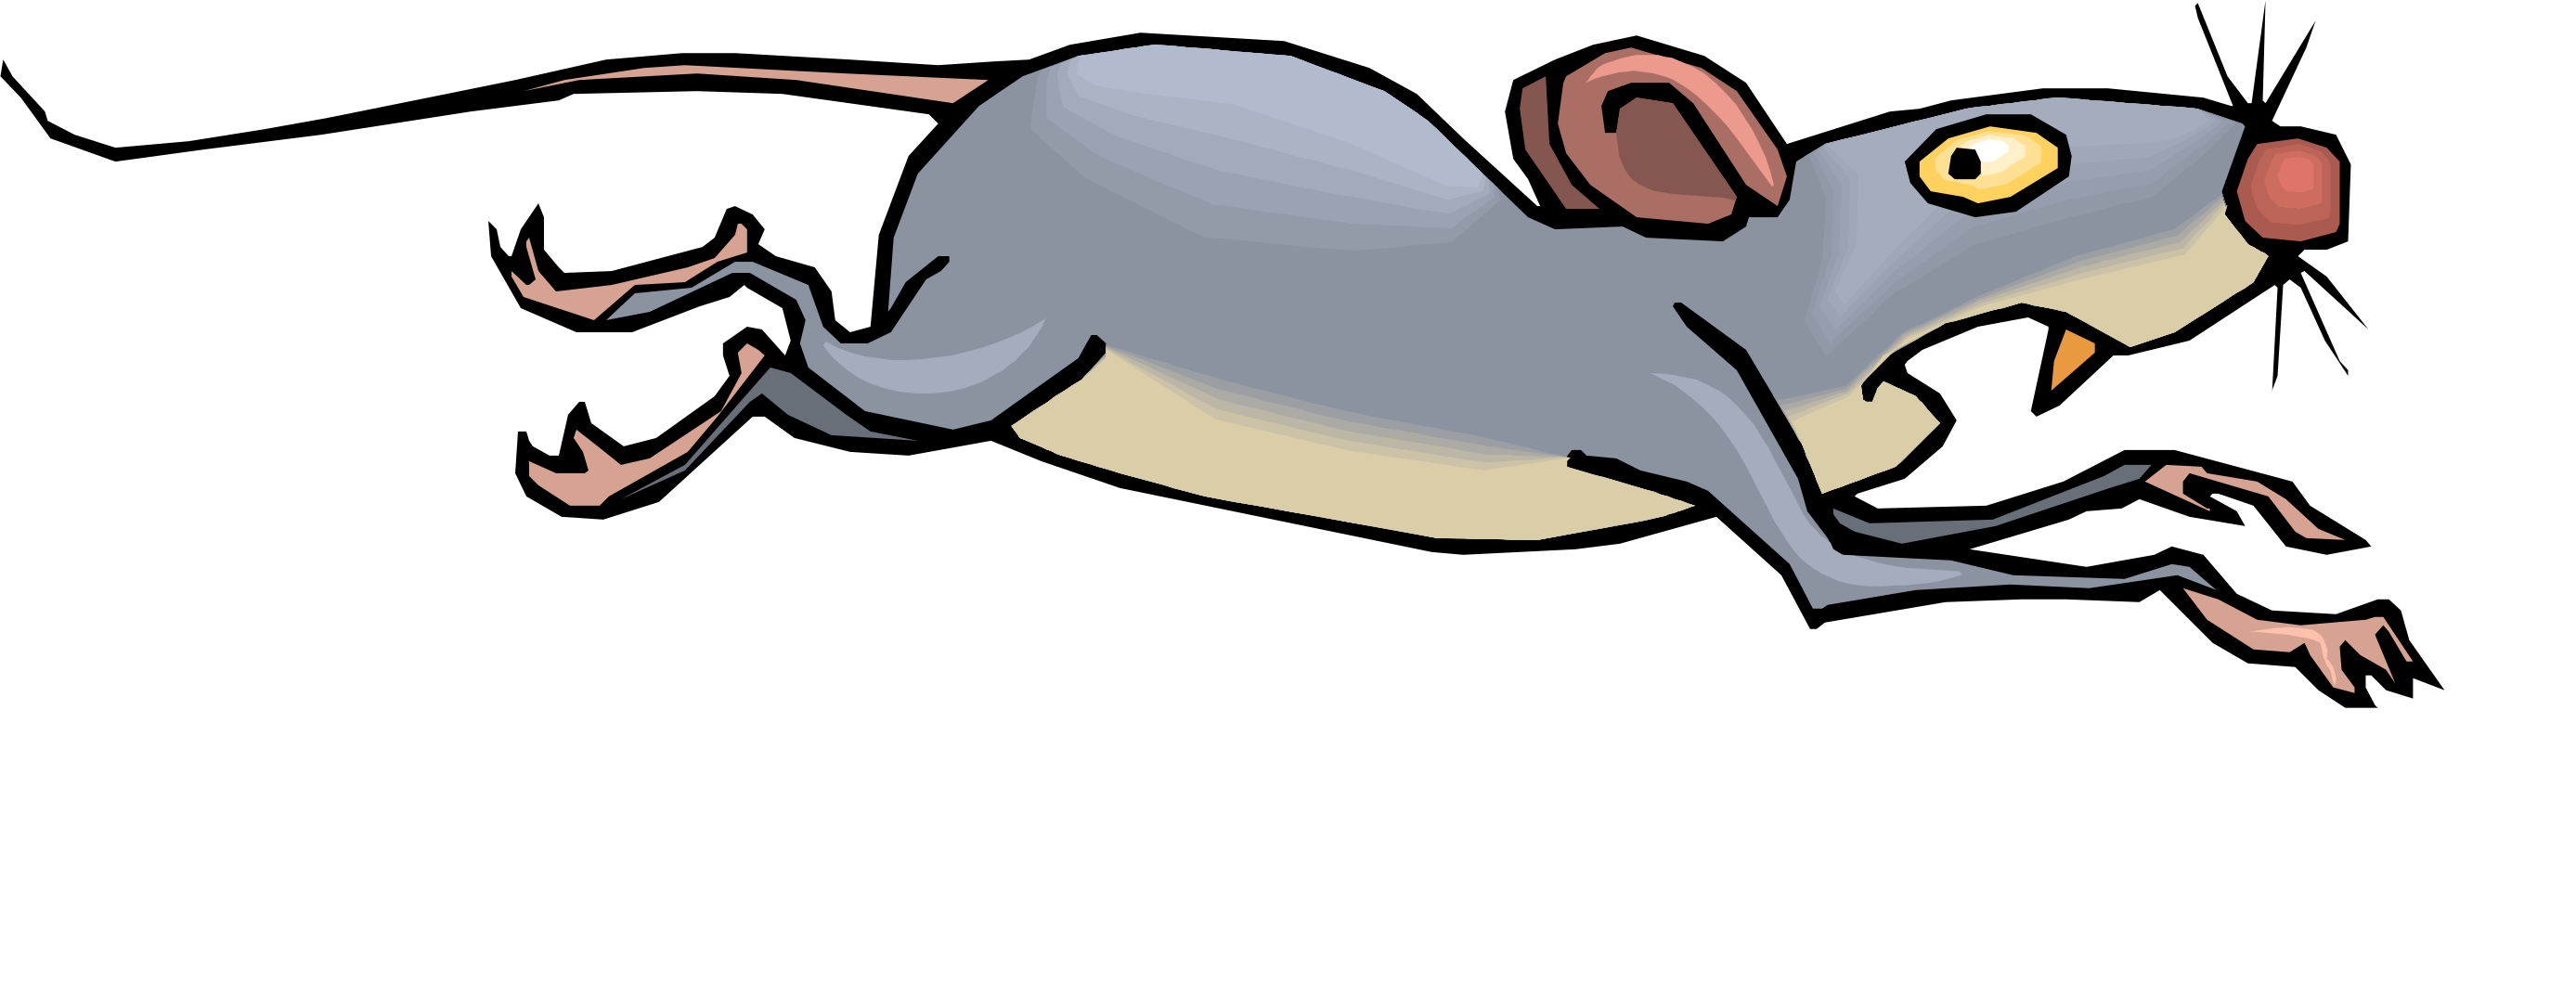 Free Mouse Running Cliparts, Download Free Clip Art, Free